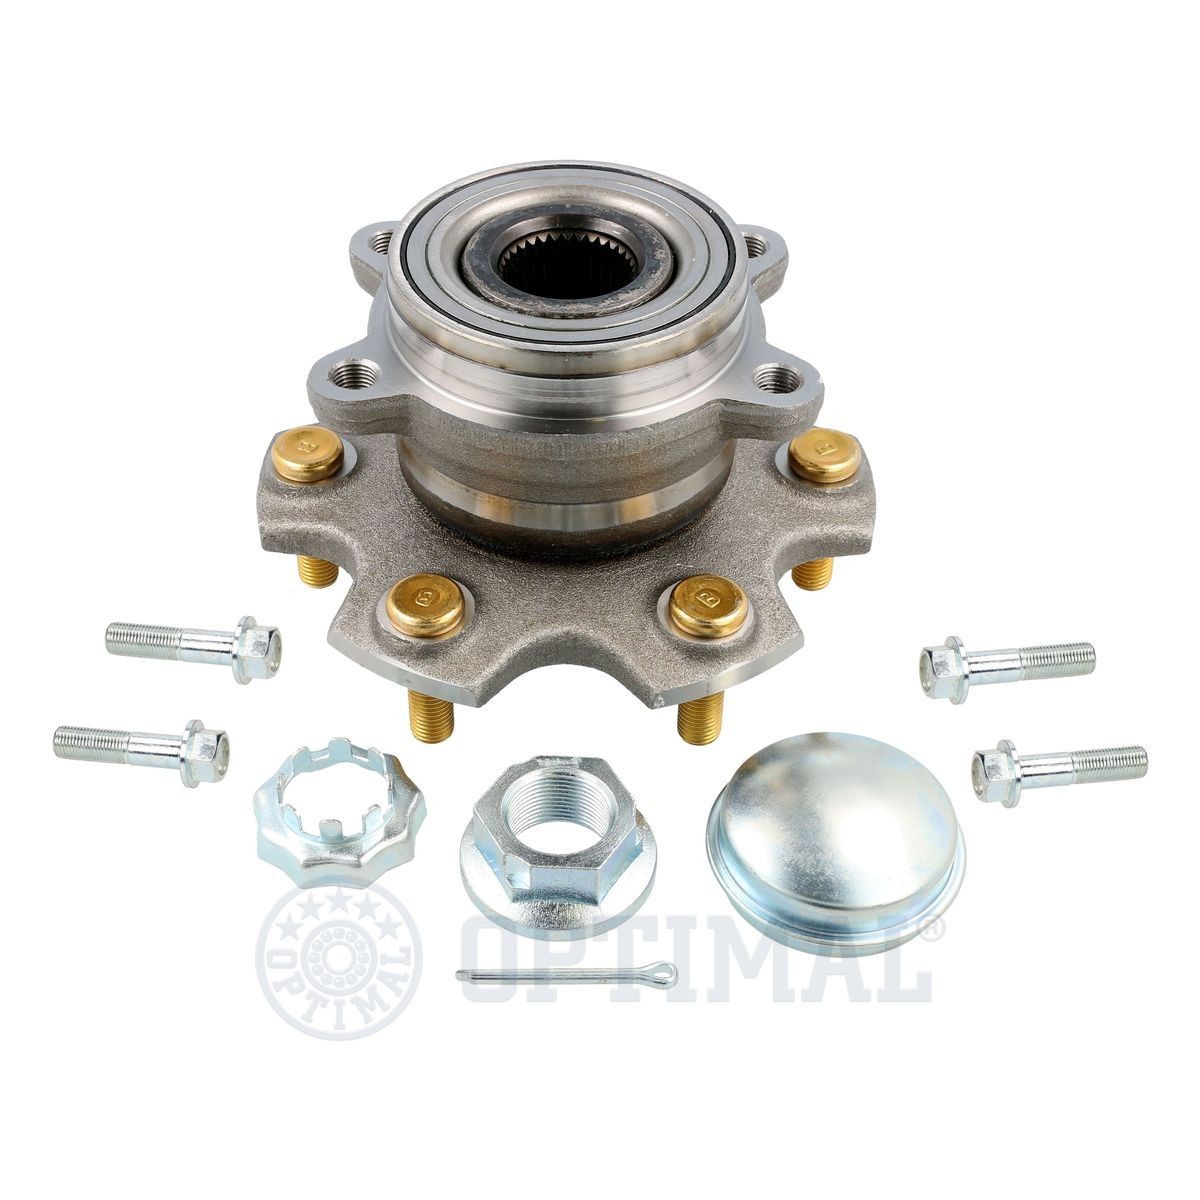 OPTIMAL 952755L Wheel bearing kit with accessories, with wheel hub, with fastening material